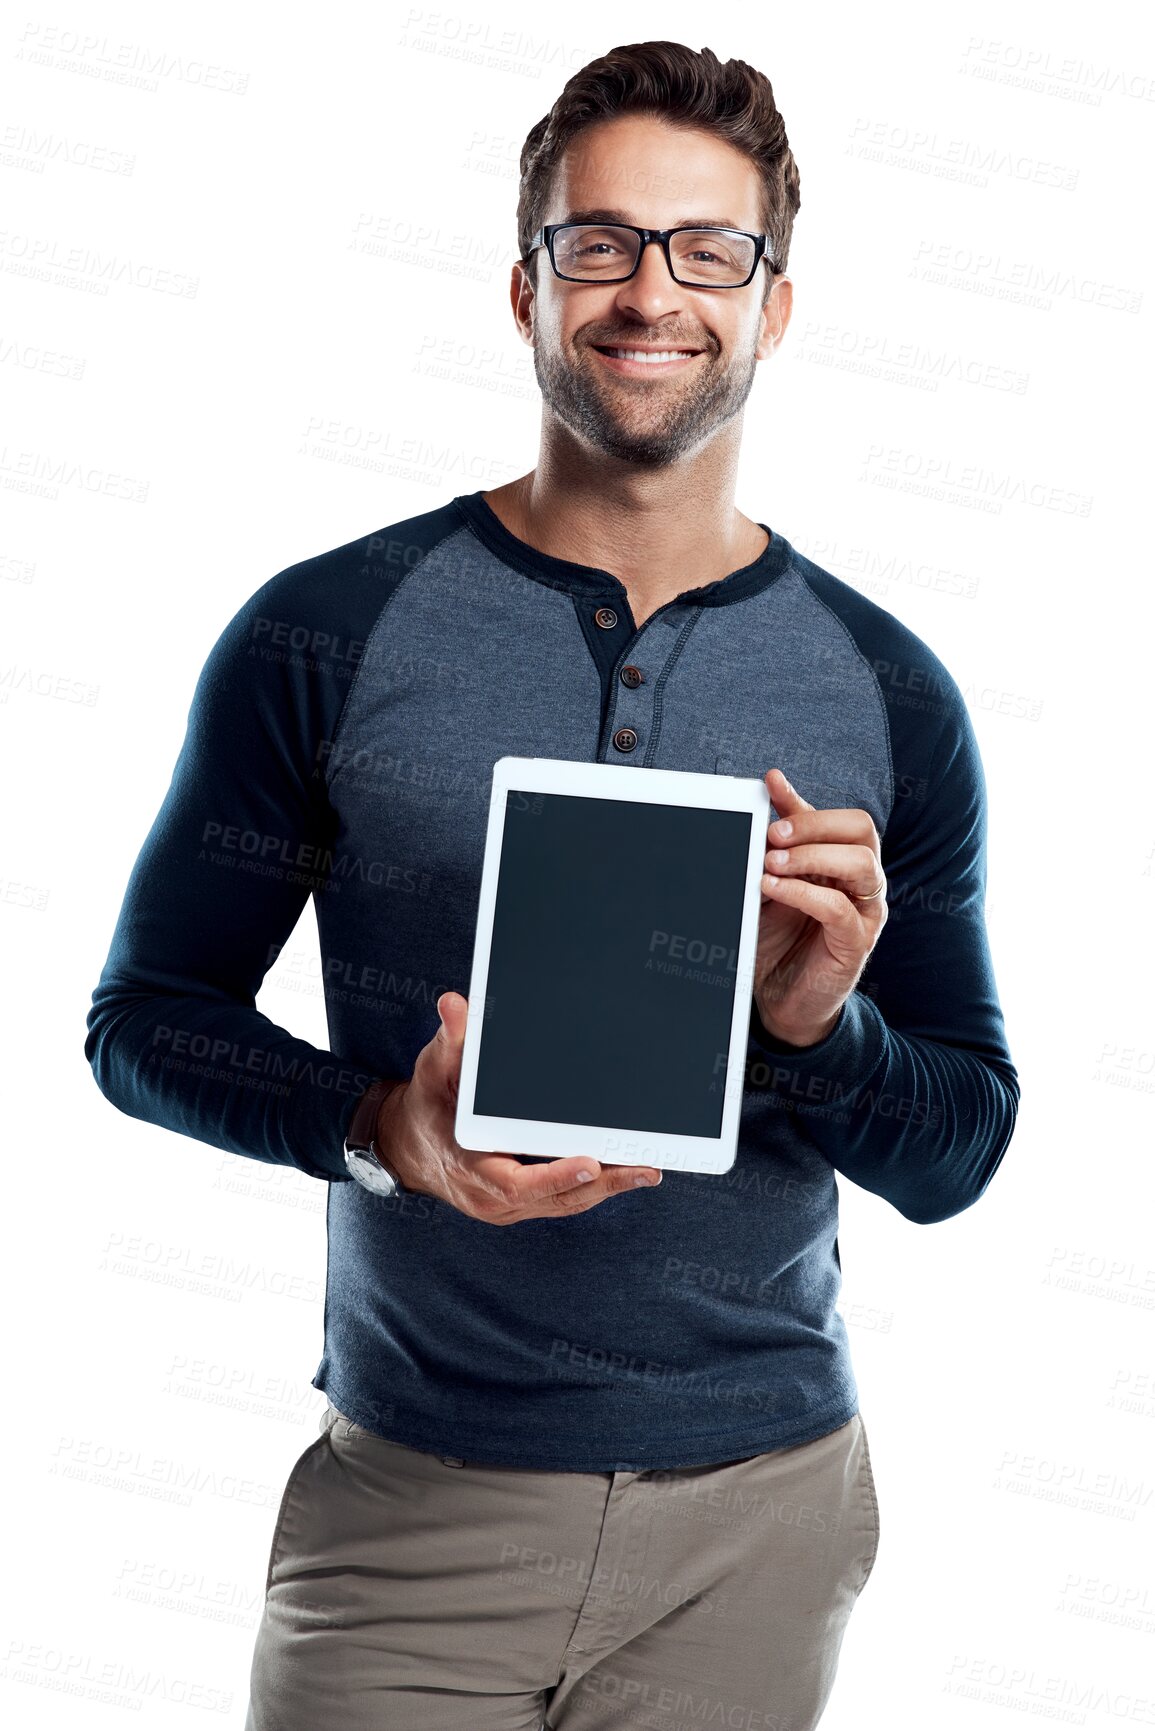 Buy stock photo Tablet, mockup and happy with portrait of man on transparent background for networking, social media and internet. Digital, technology and online with male developer isolated on png for app show